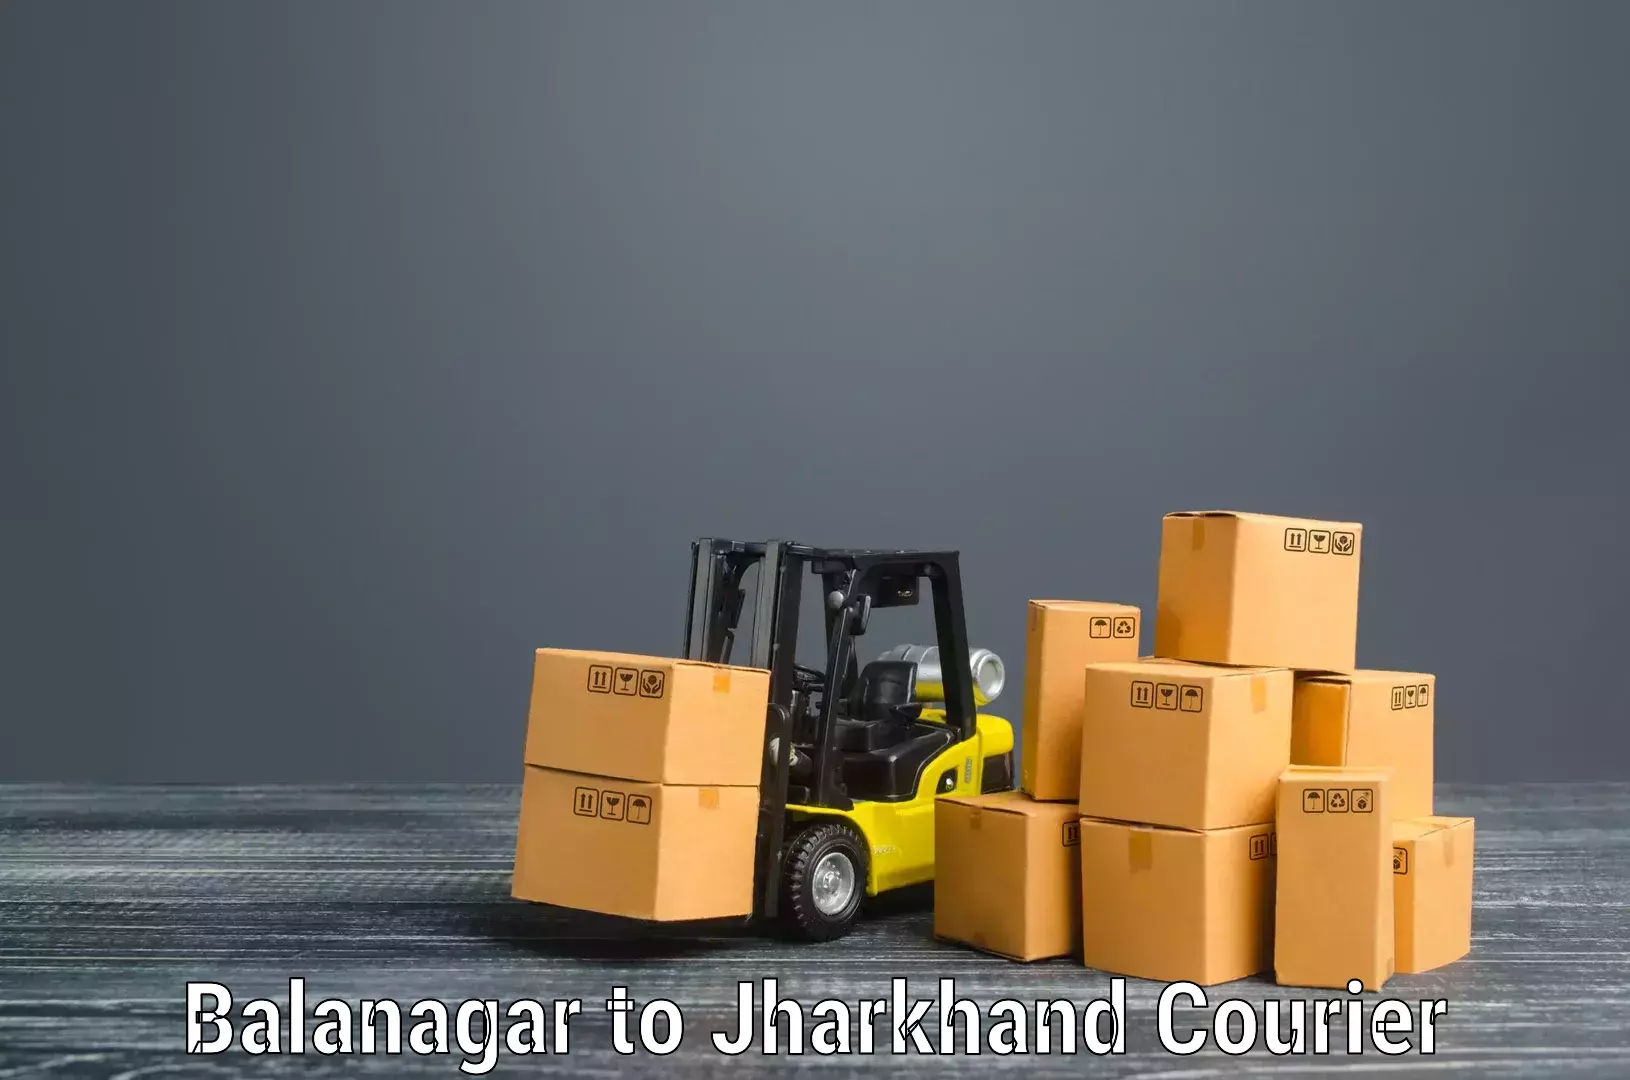 Furniture moving specialists Balanagar to Jharkhand